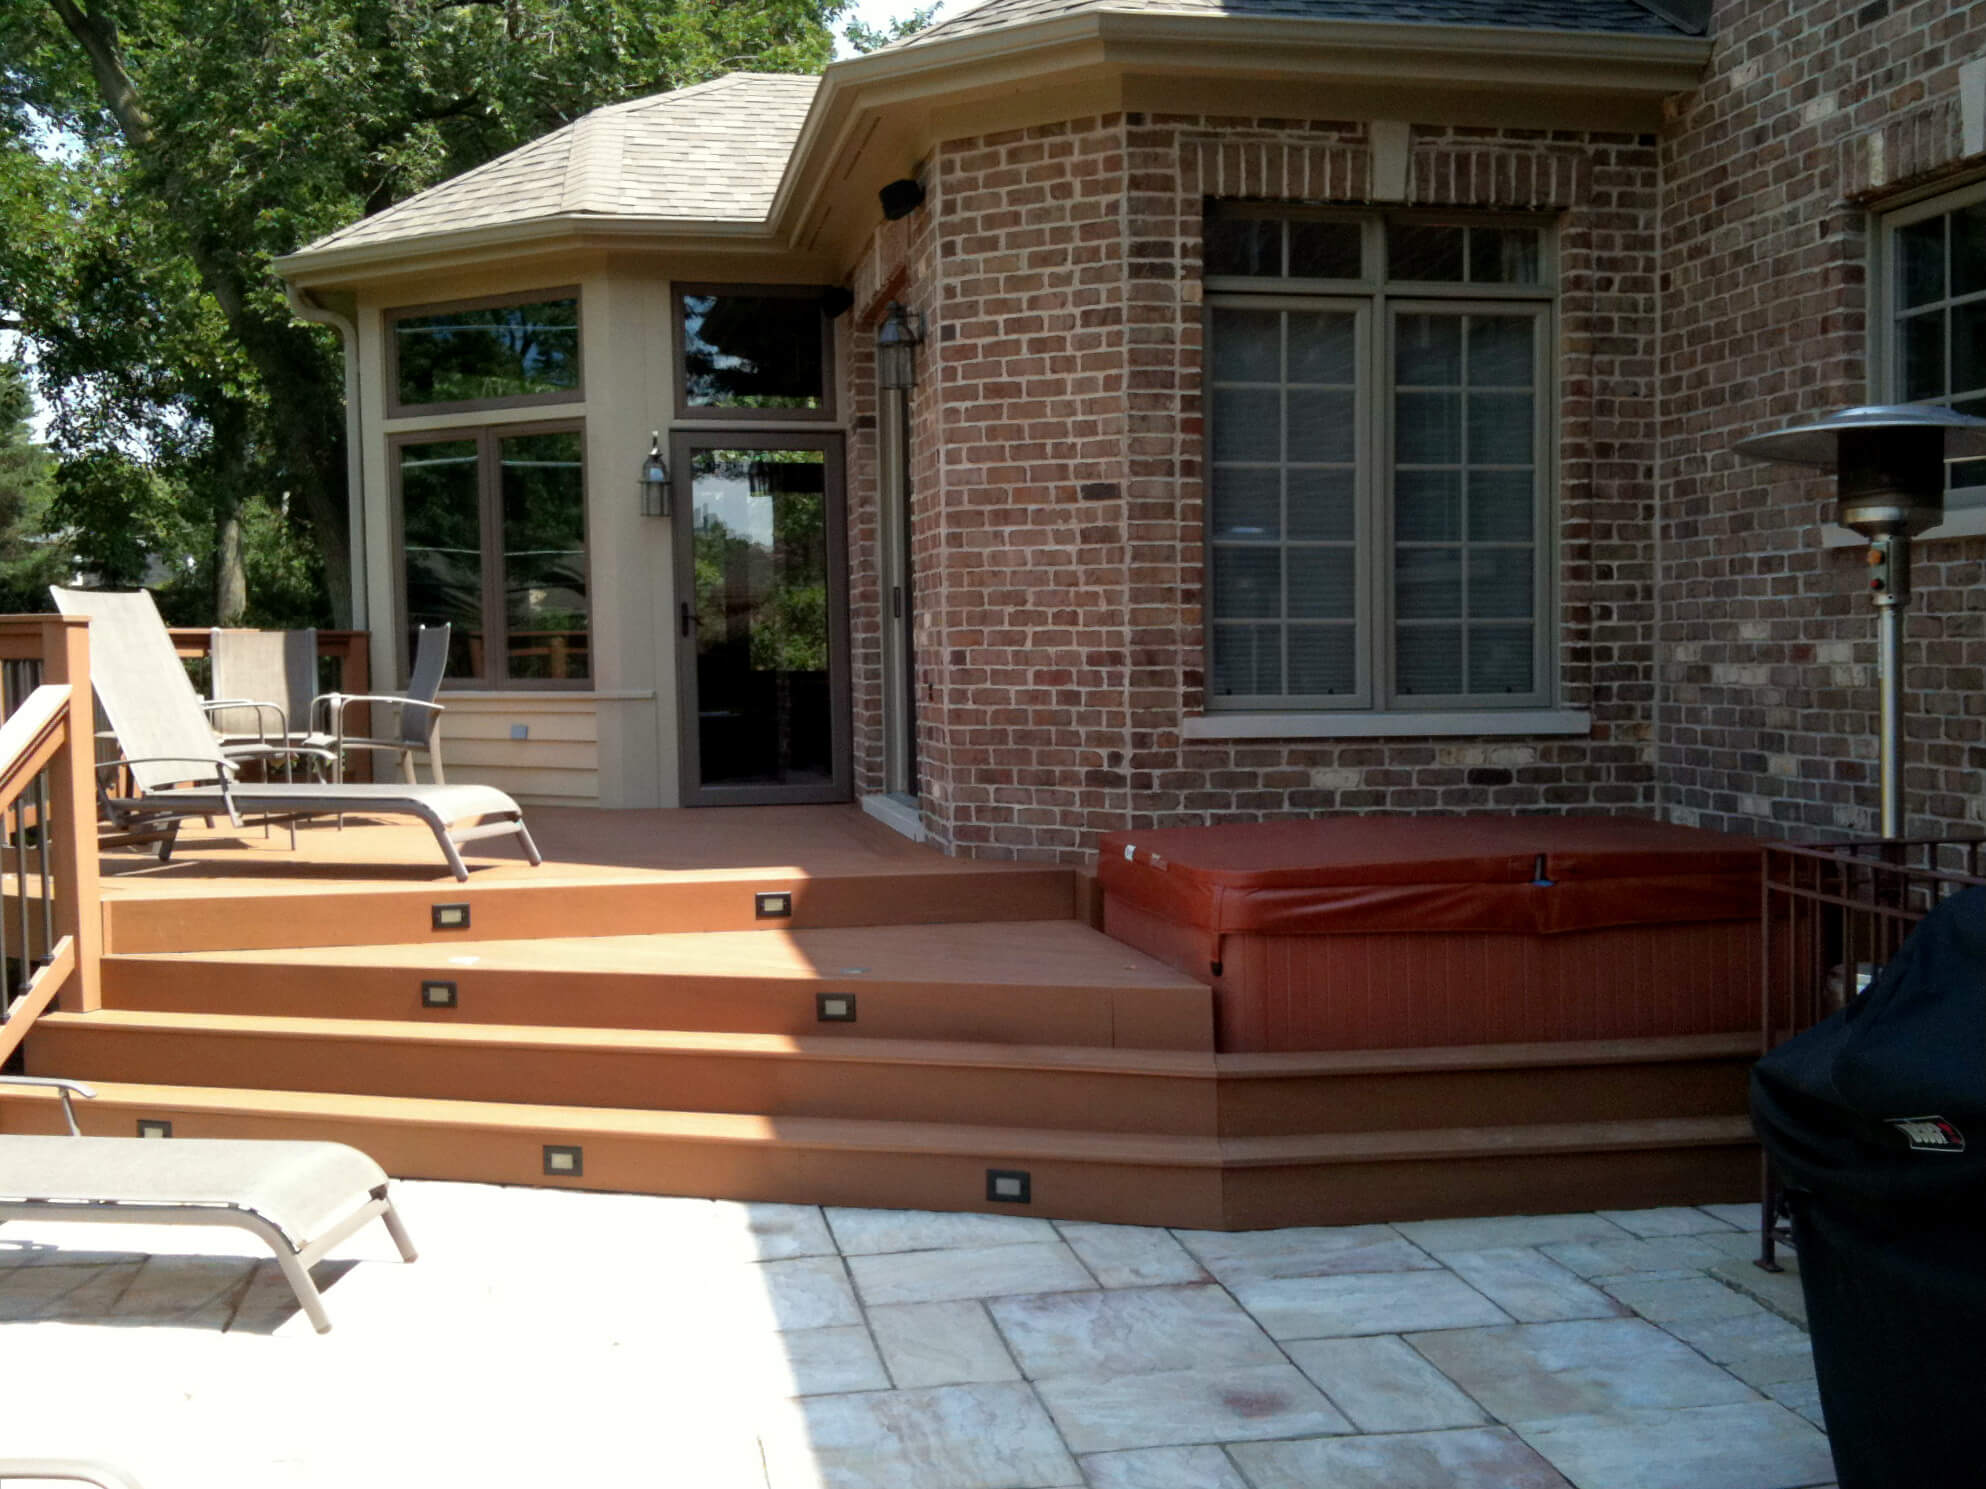 Custom composite deck with hot tub